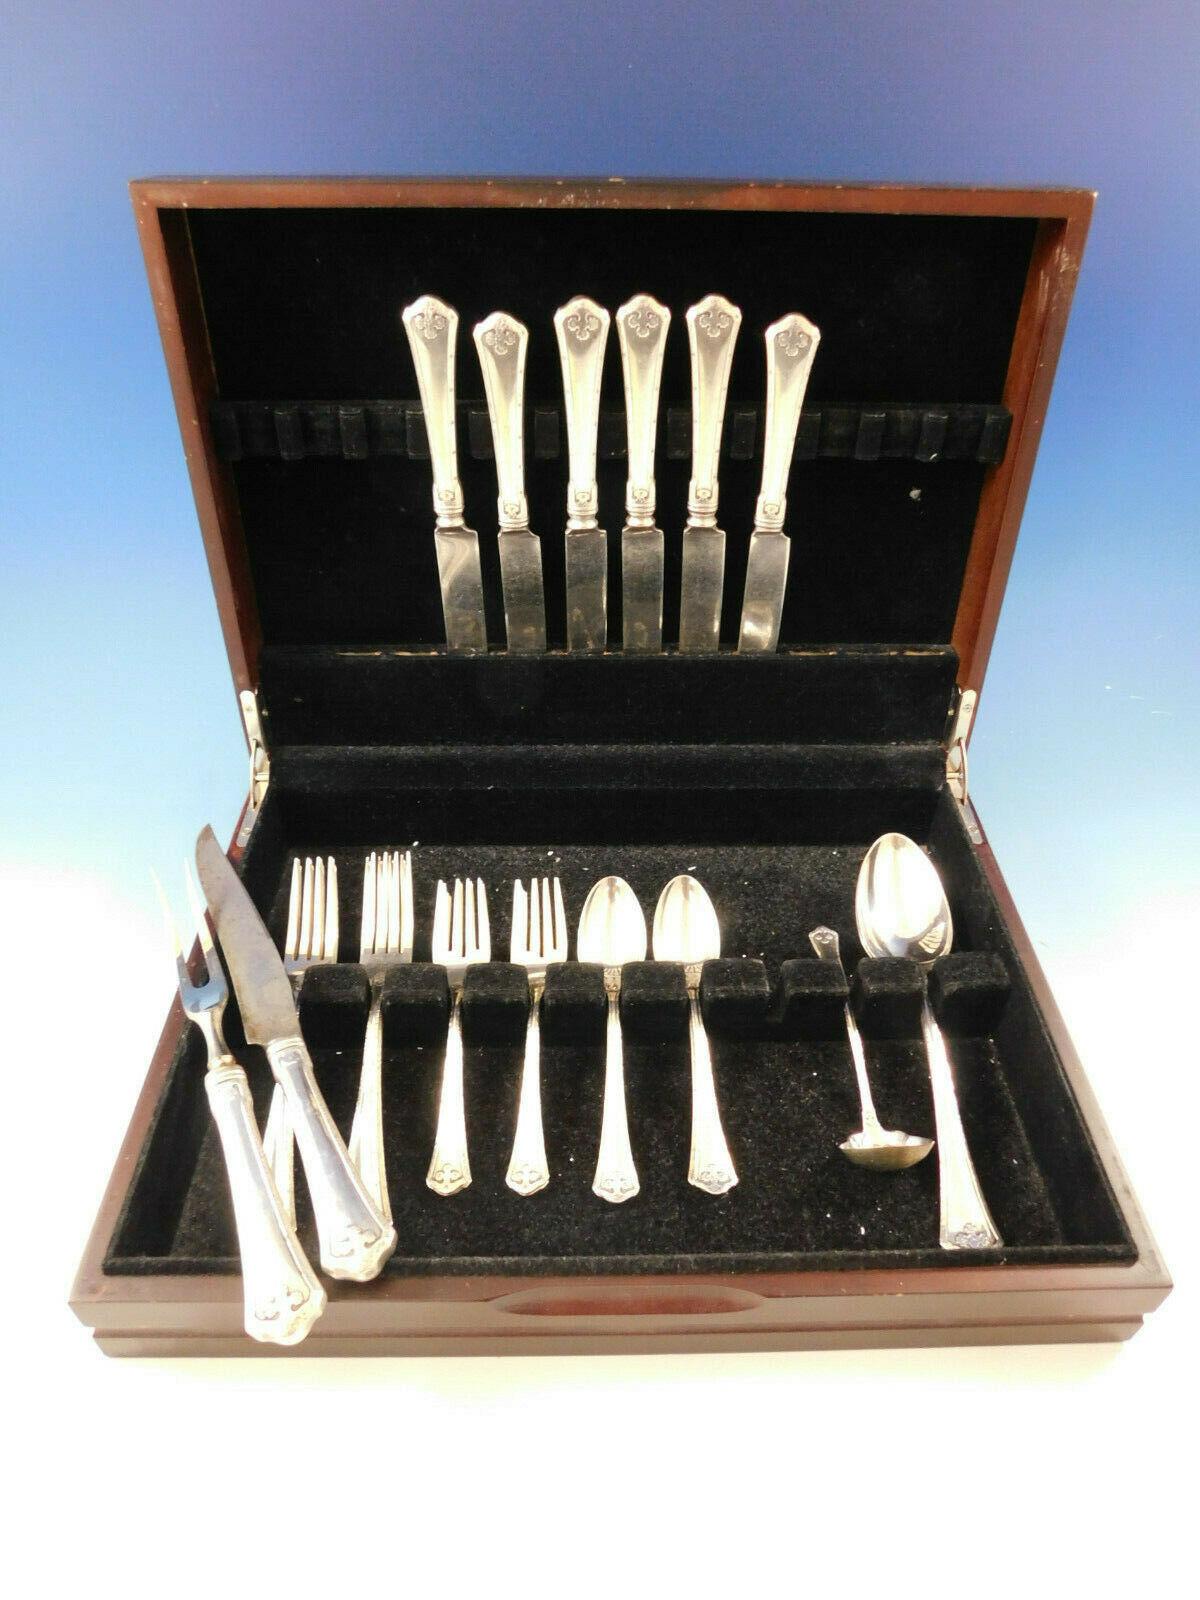 Carmel by Wallace sterling silver dinner size flatware set - 38 pieces. Great starter set! This Arts & Crafts pattern was introduced in the year 1912 and features a raised hammered border with stylized bolts. This set includes:

6 dinner size